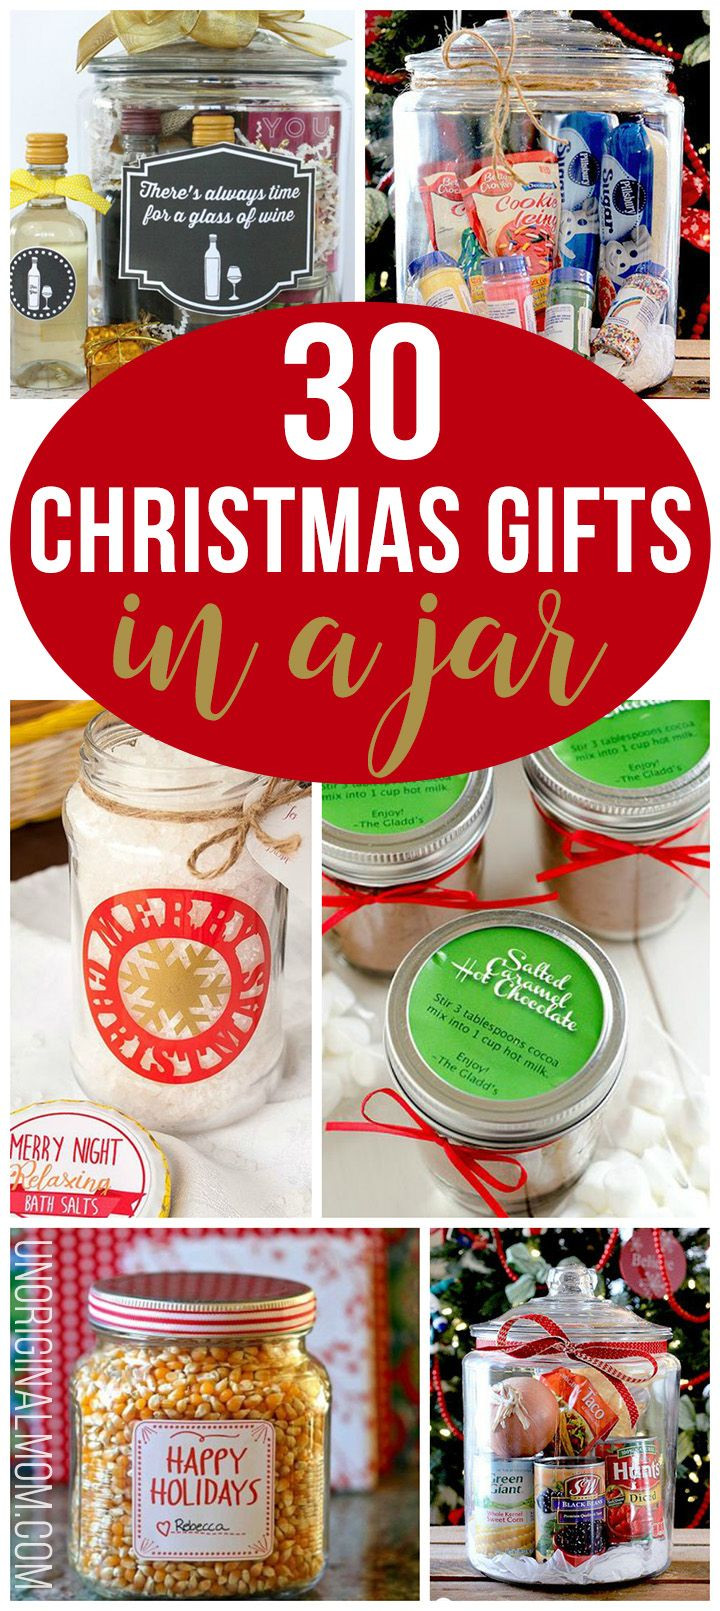 Unique Holiday Gift Ideas
 30 Christmas Gifts in a Jar